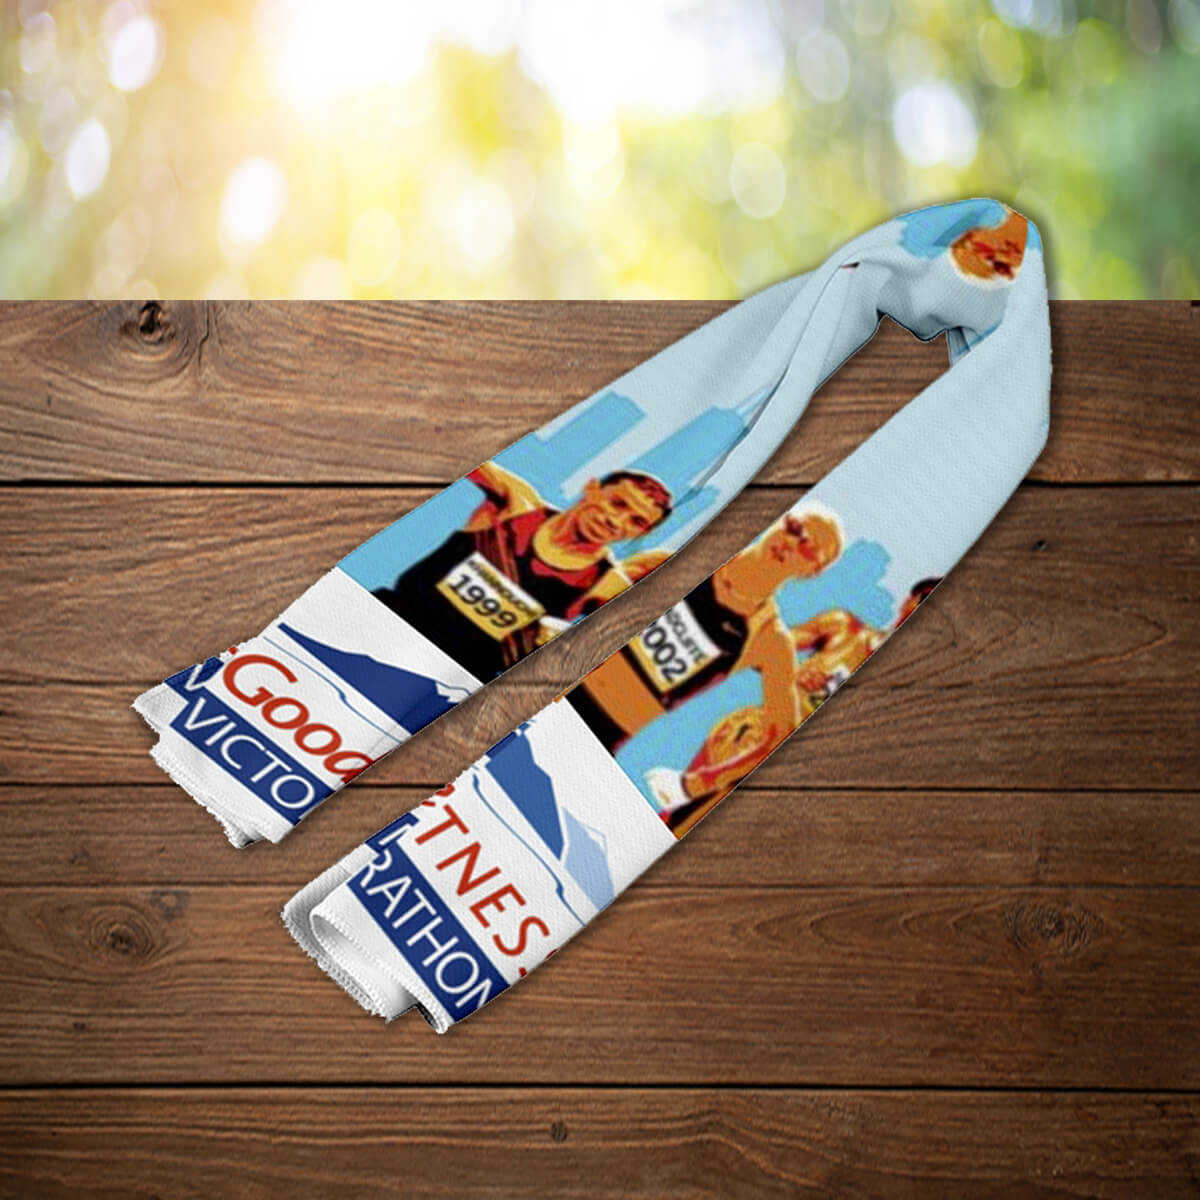 Sublimated marathon custom neck cooling towel promotional towels by curative printing